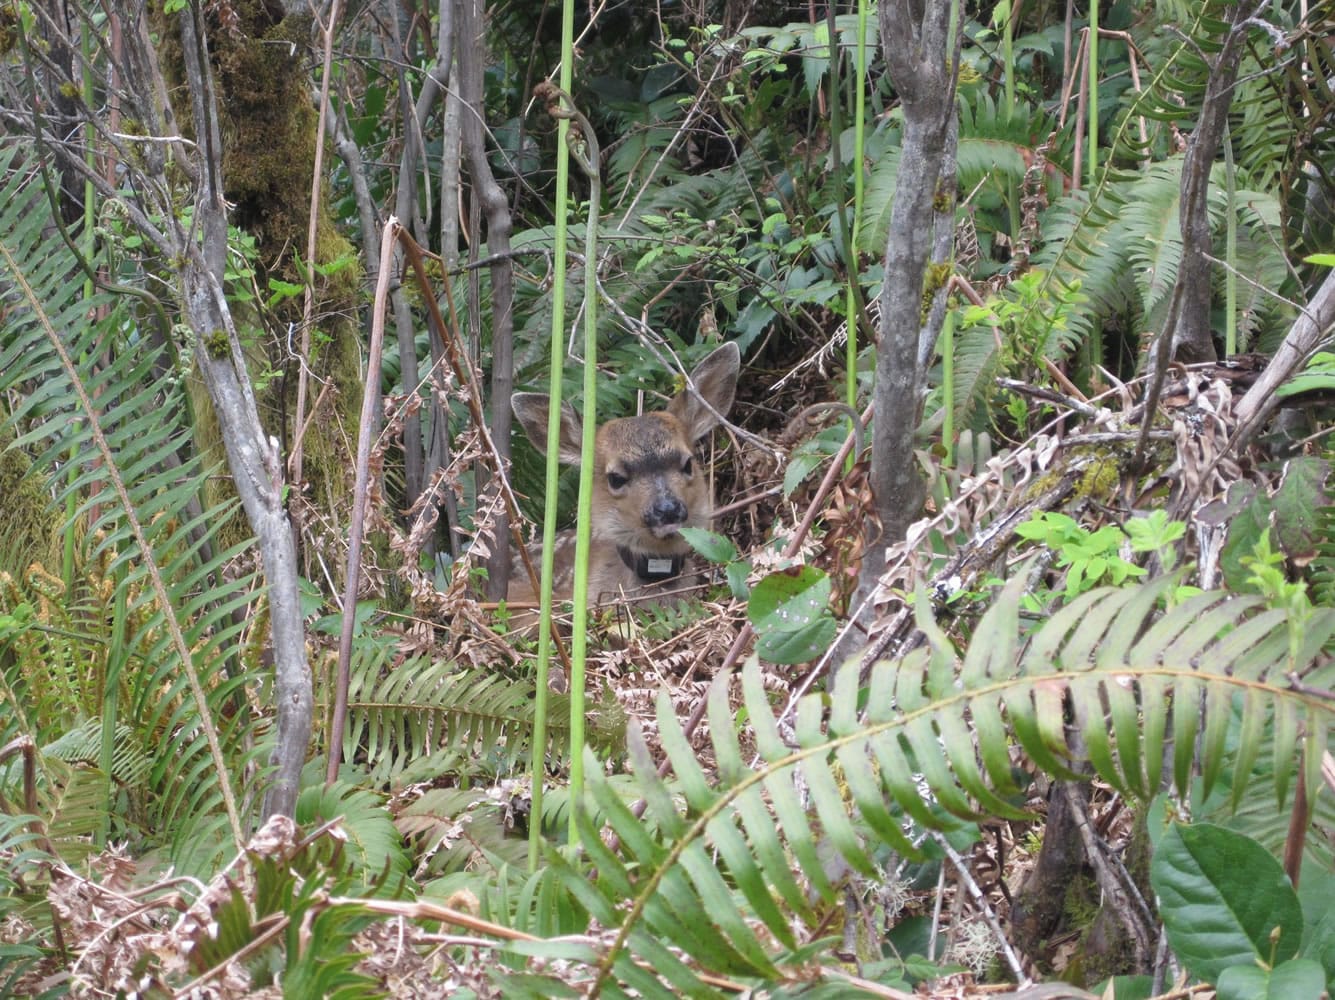 A blacktail deer fawn captured in May of 2010 in the Washougal unit as part of the Western Washington study.